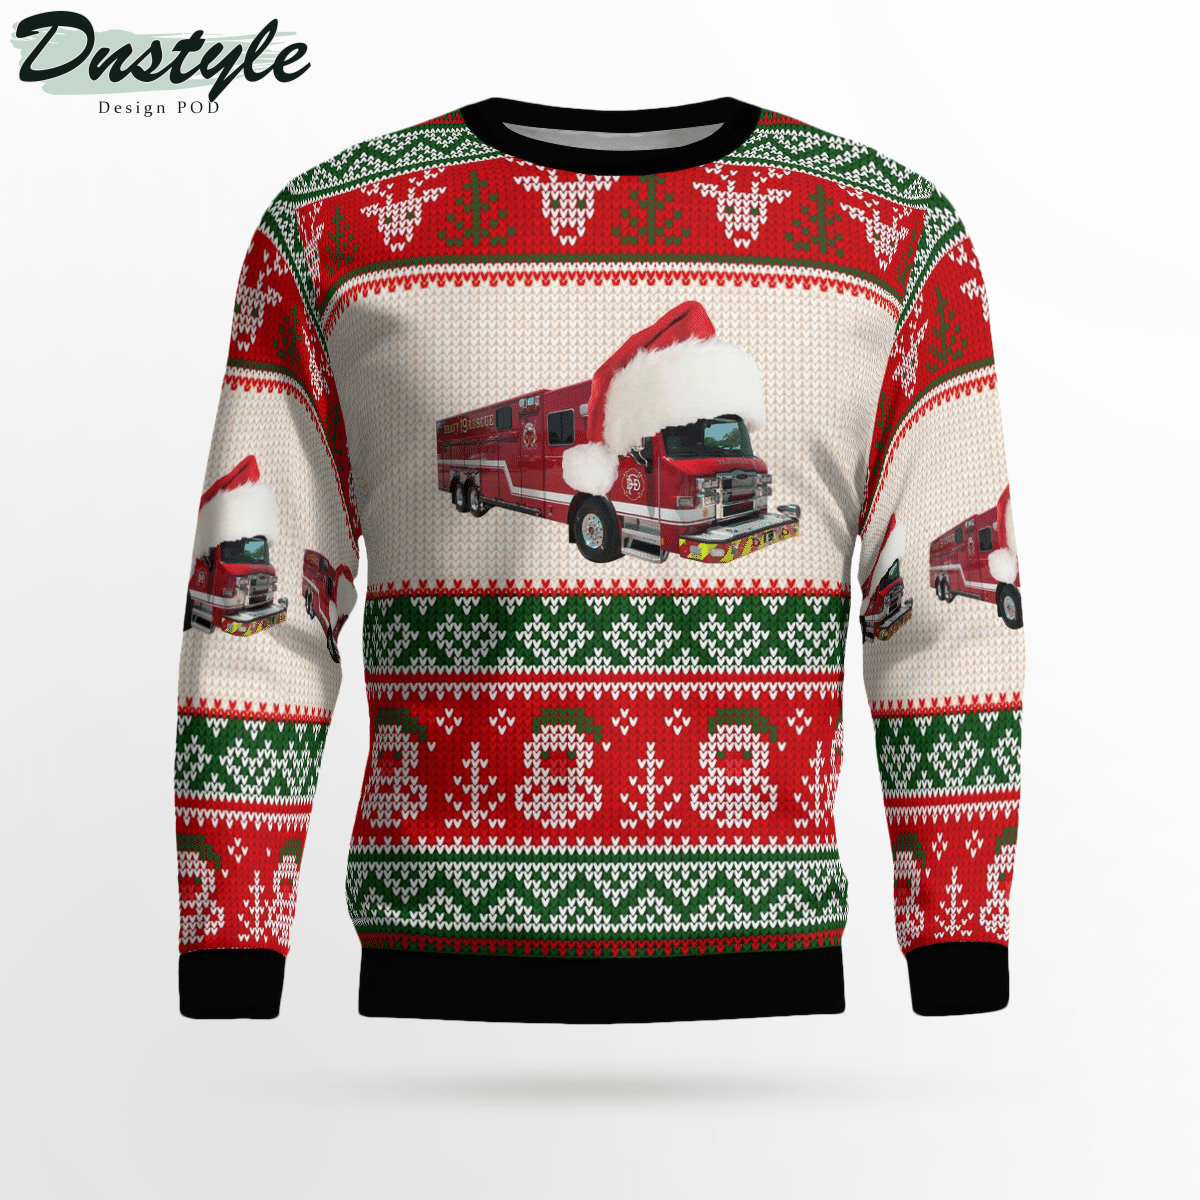 Dallas Fire Station 19 Ugly Christmas Sweater